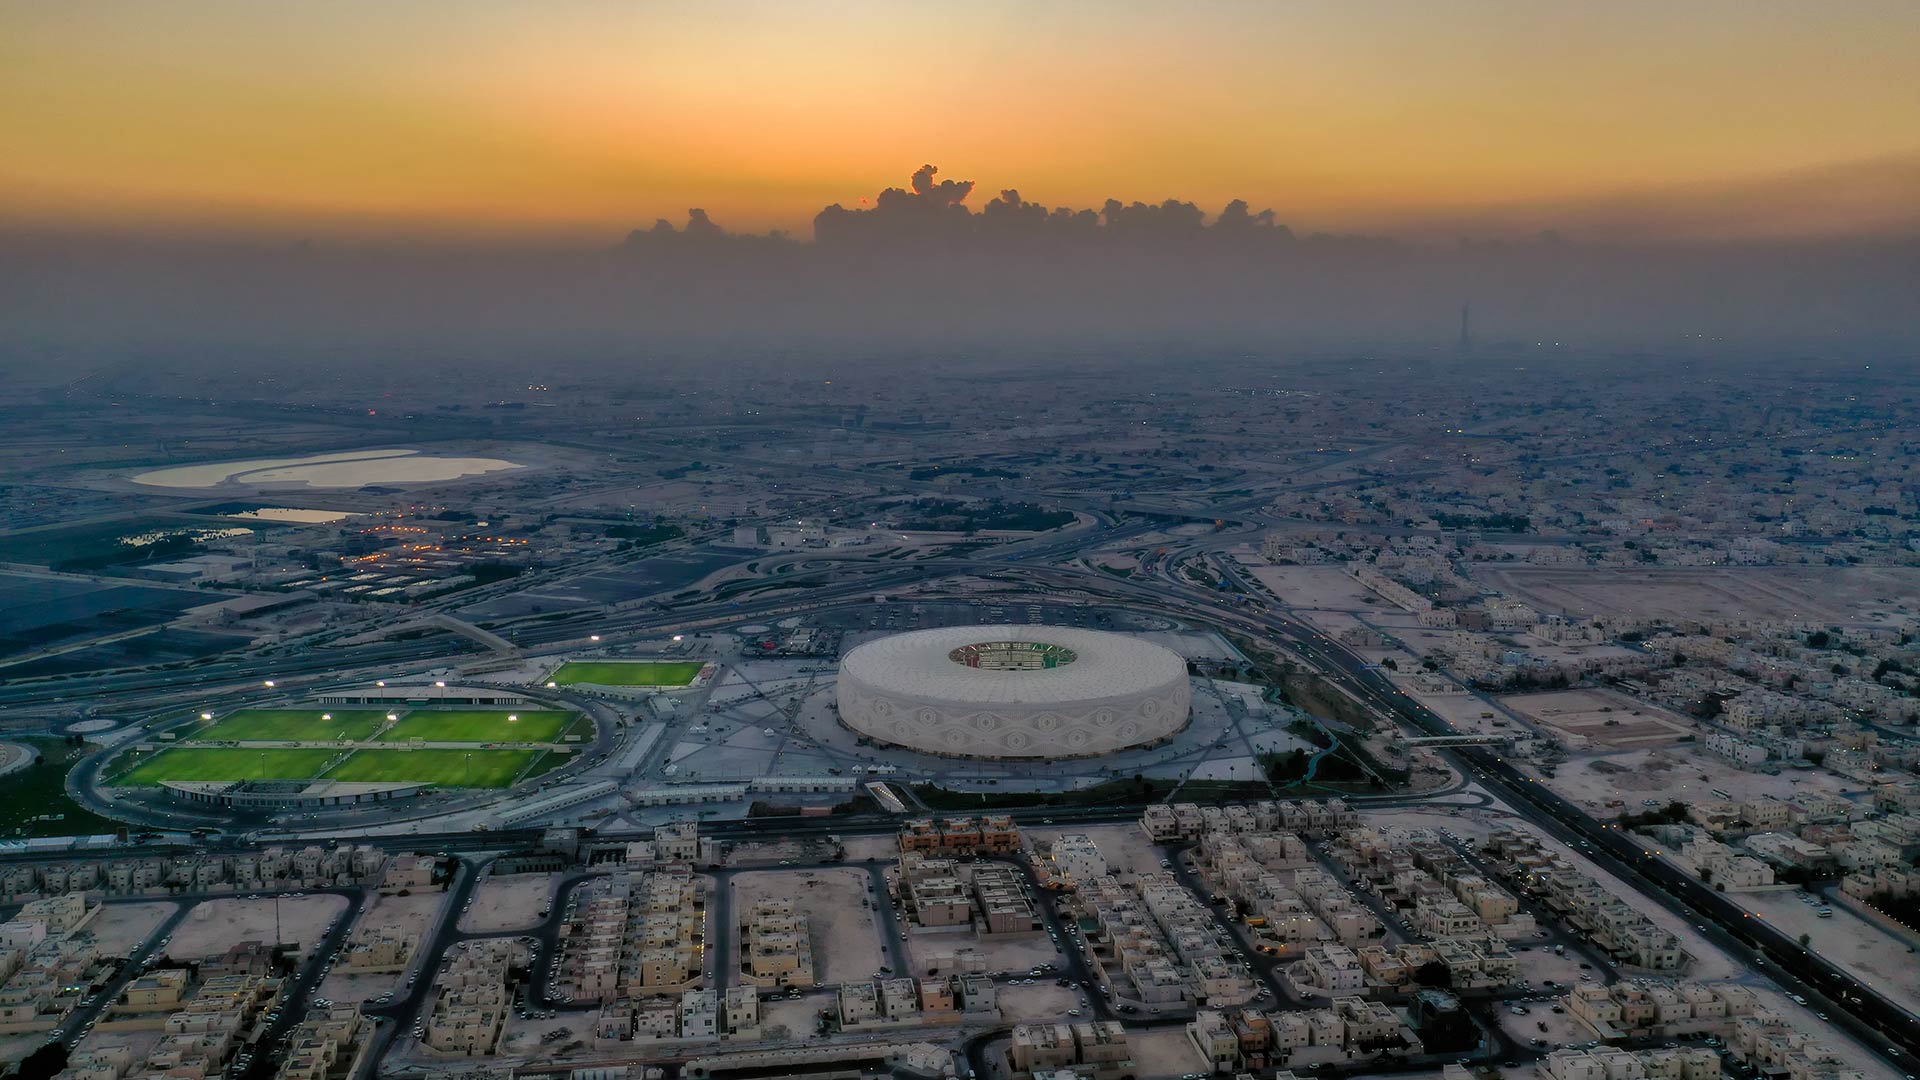 Key information for fans attending Amir Cup Final at Al Thumama Stadium